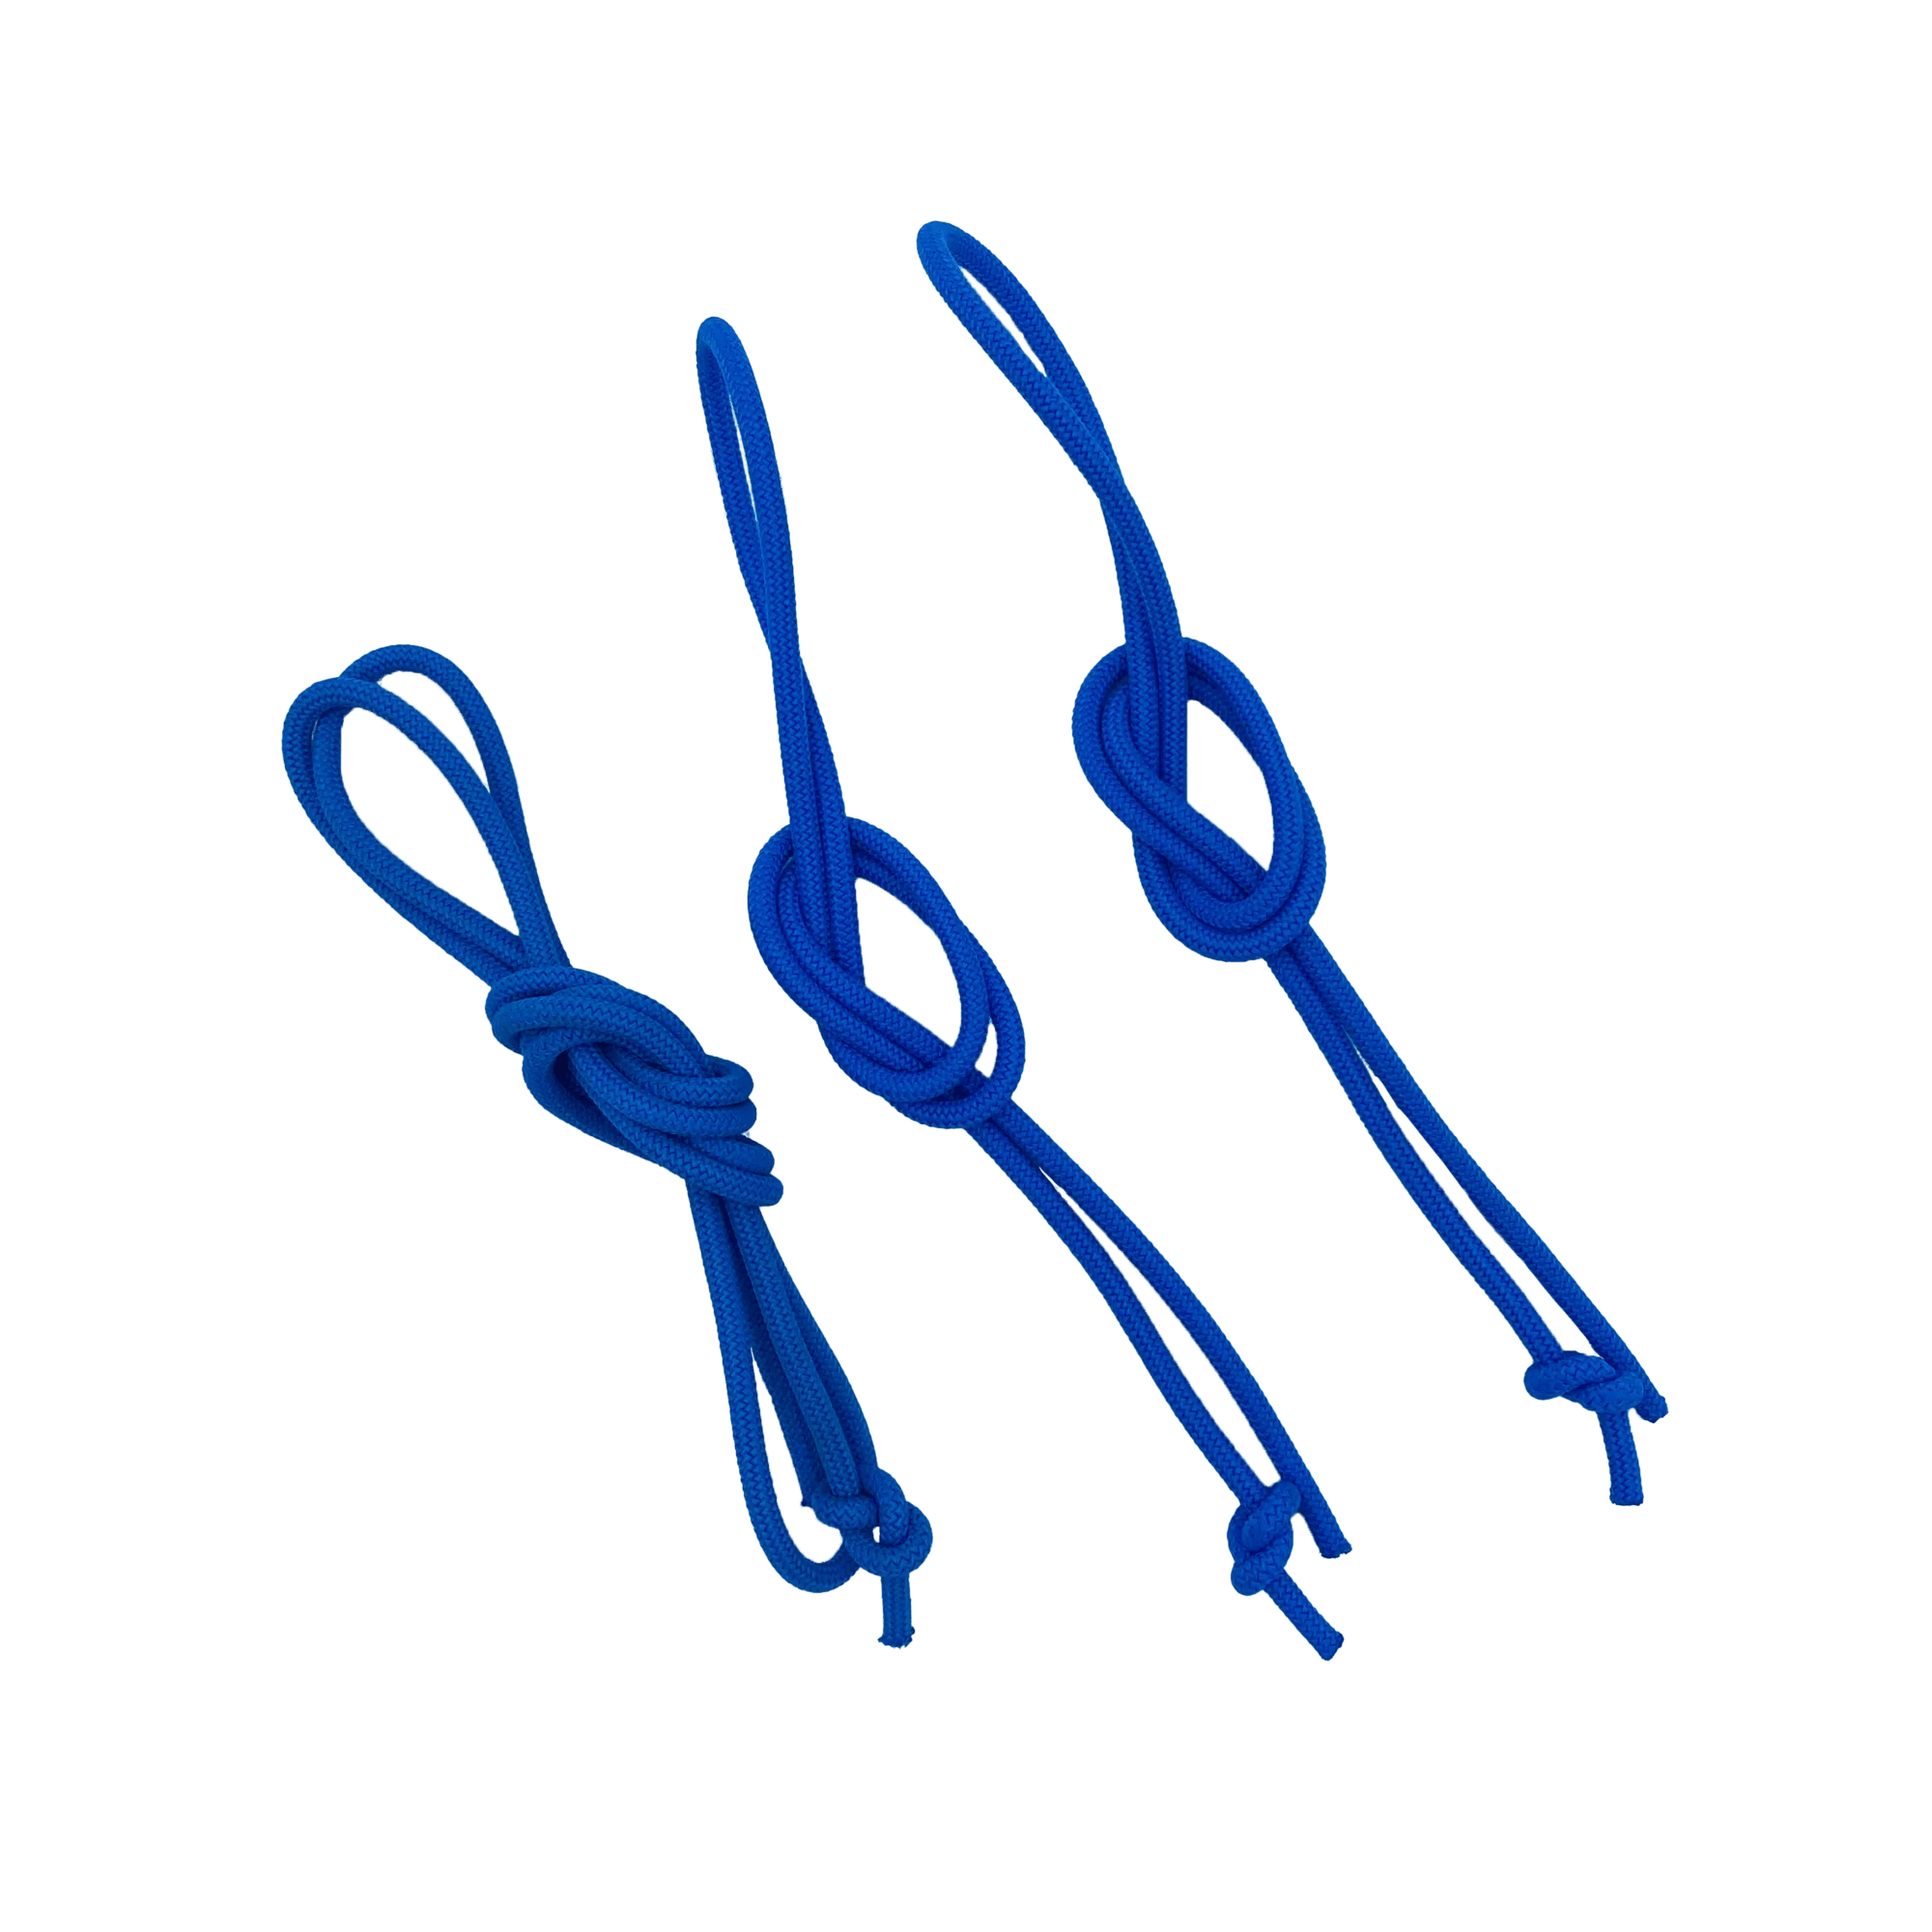 PELICAN - Electric Blue Bungee Cord Deck Rigging Kit -  - PS1721 - TOP